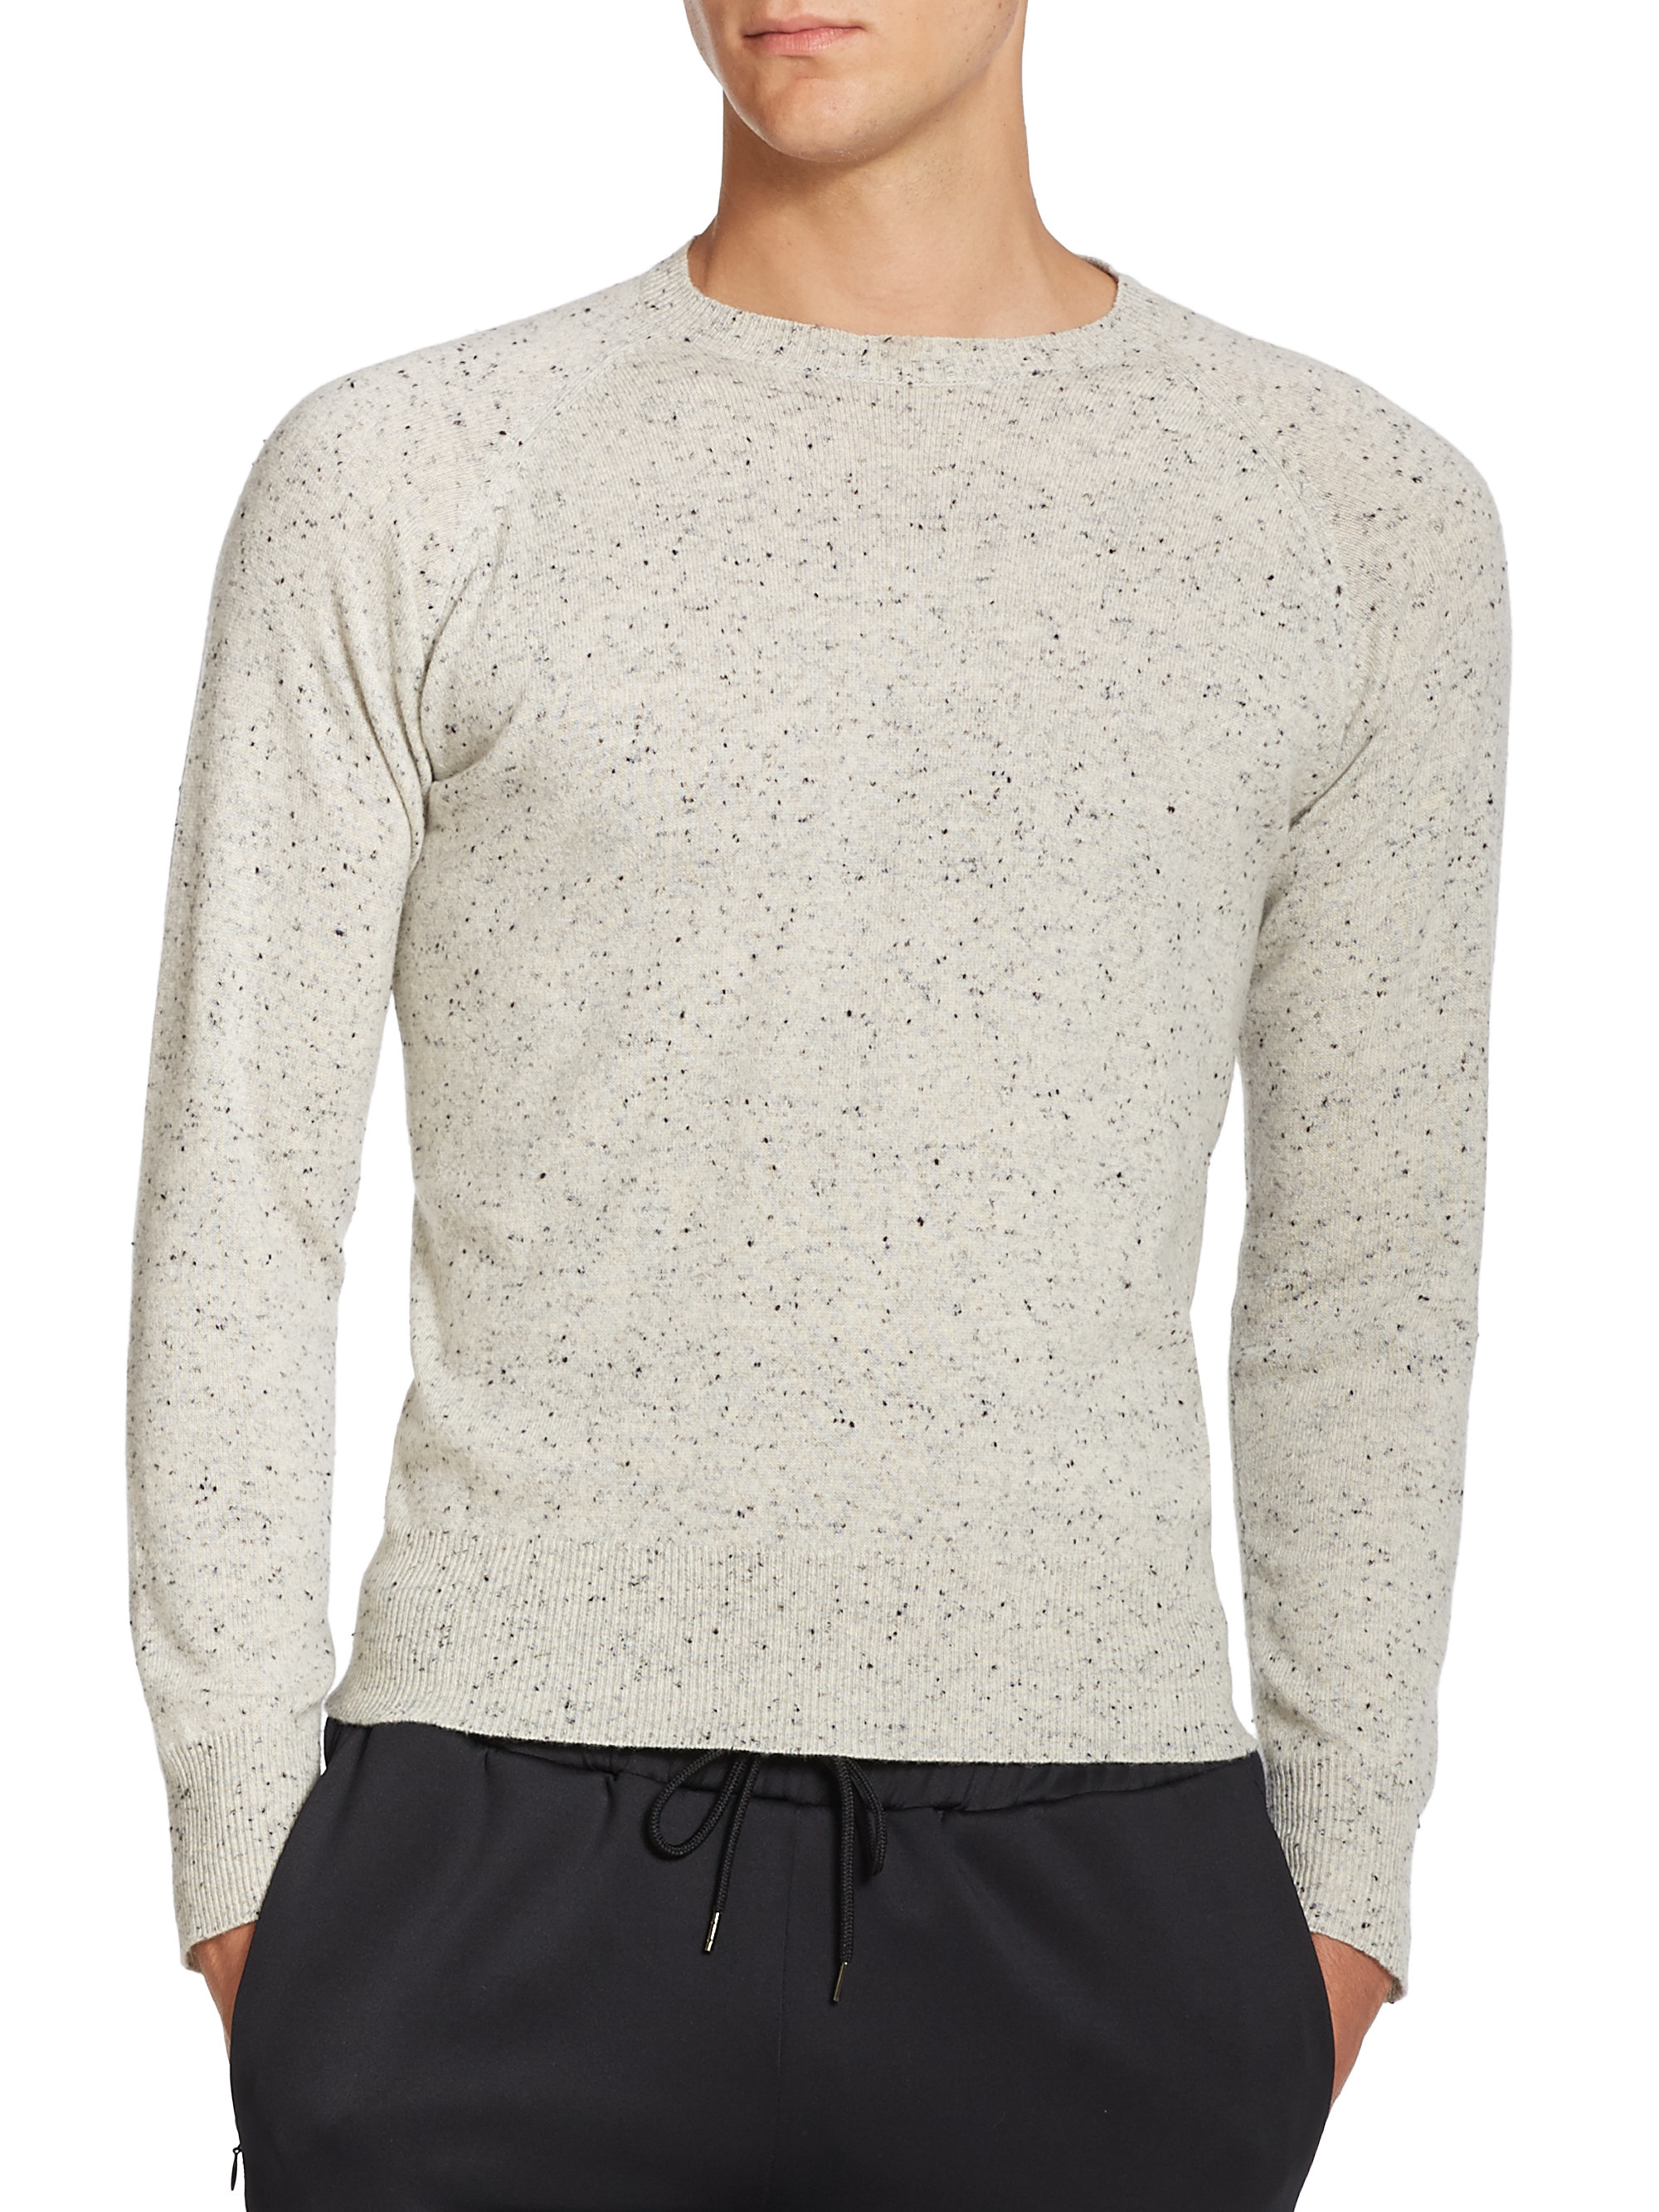 Lyst - Ovadia And Sons Heathered Donegal Cashmere Sweater in Gray for Men